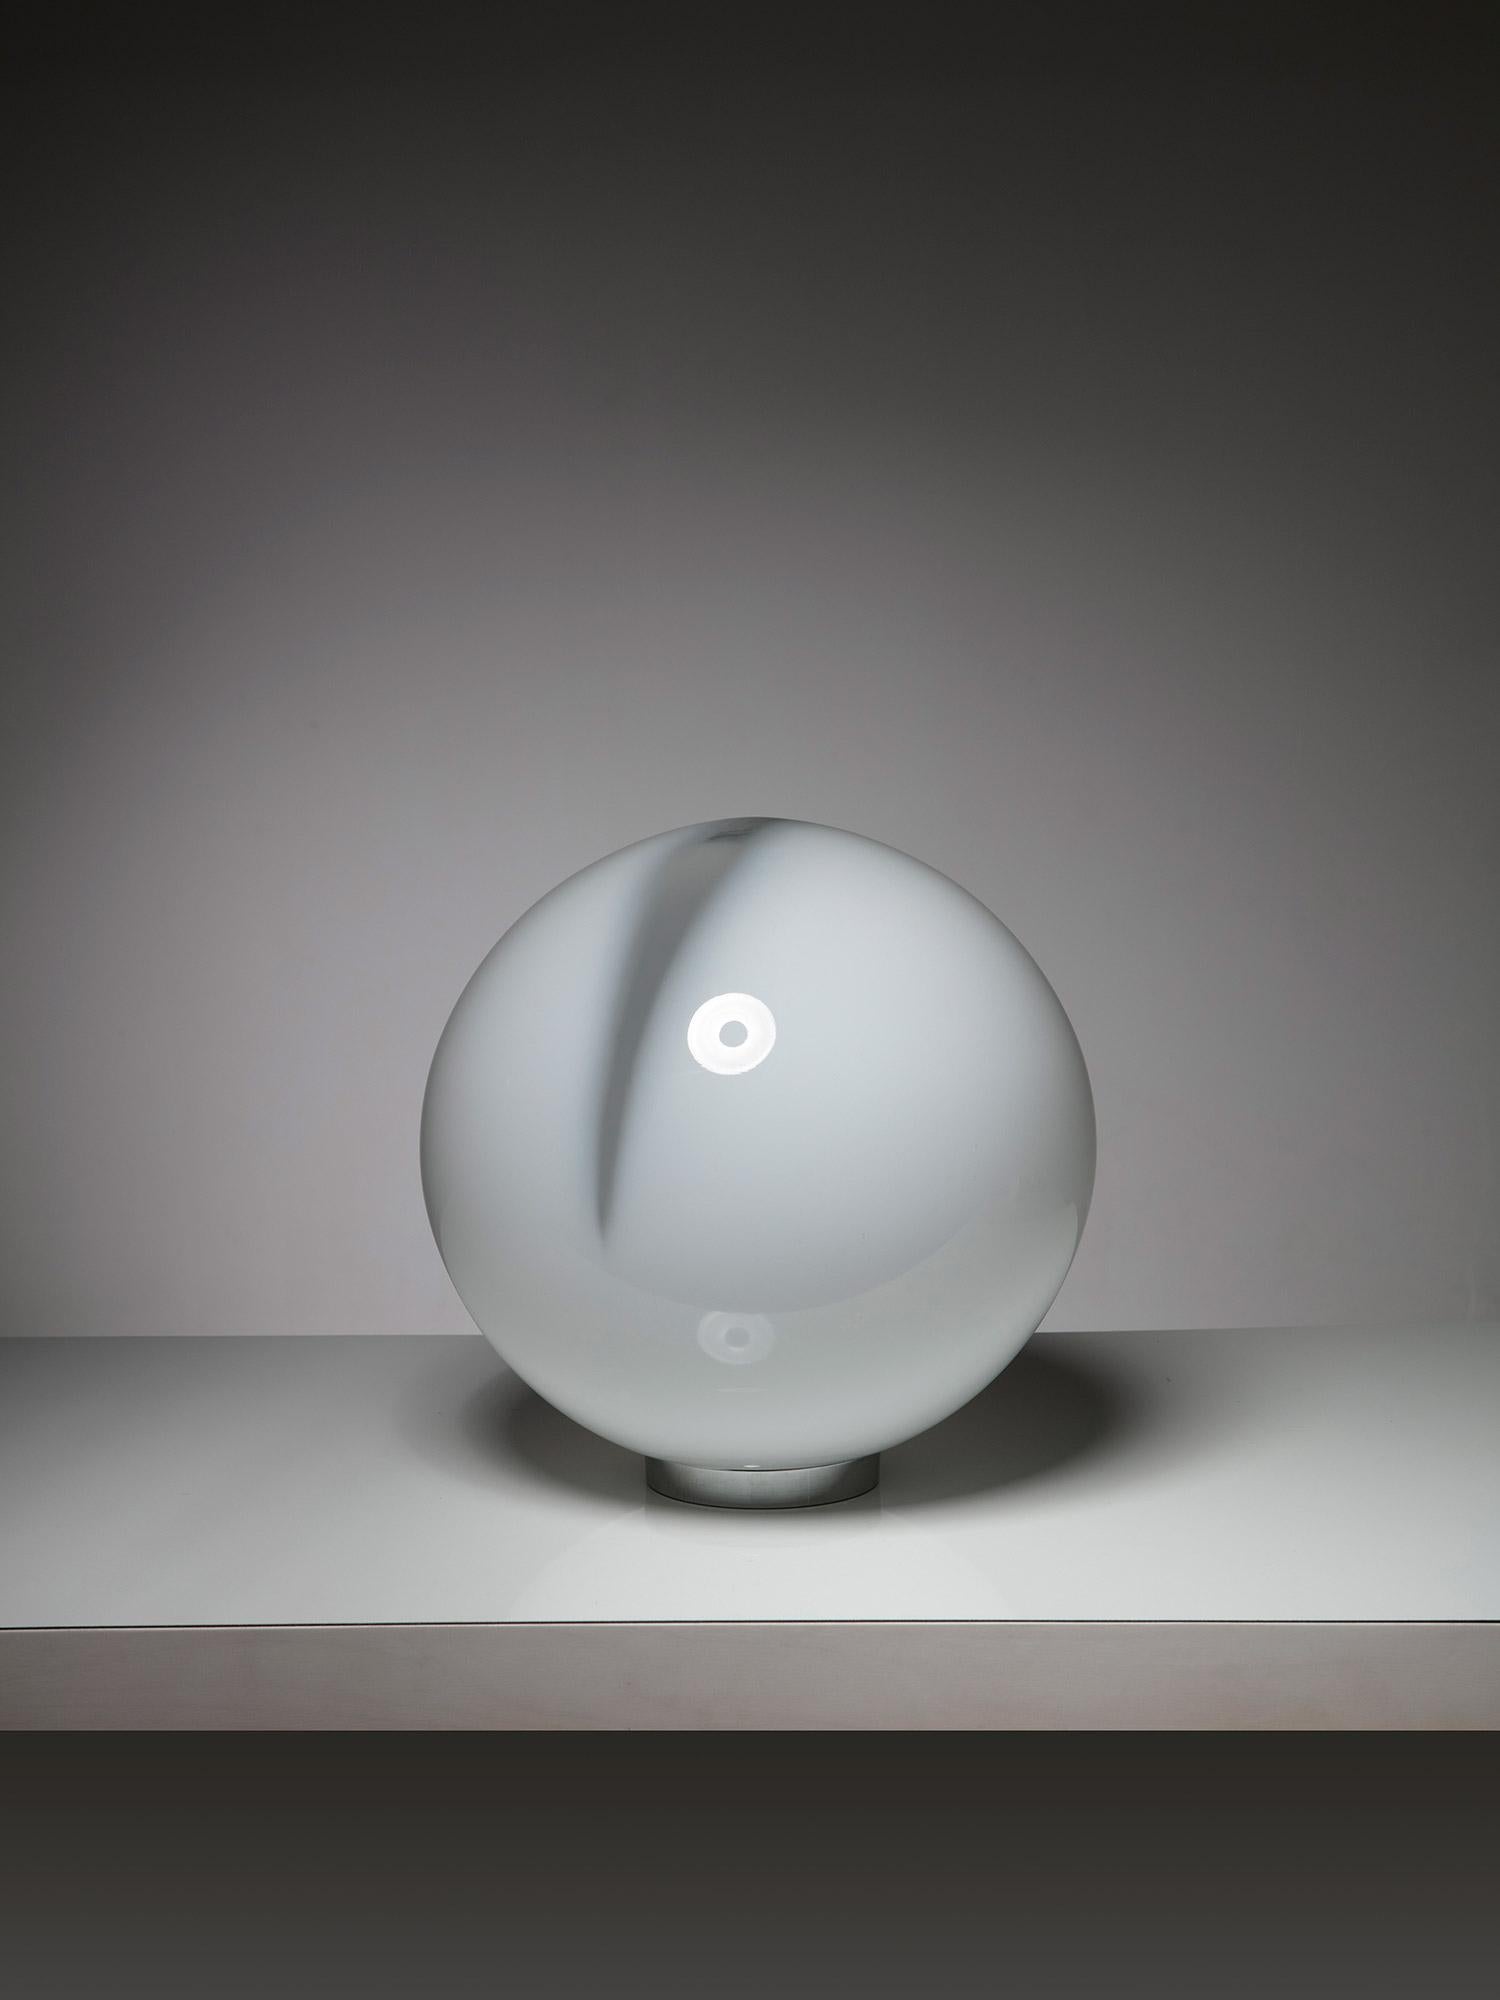 Rare table lamp by Alfredo Barbini for Barbini.
Large Murano glass opaline sphere with a central crystal stripe.
An emotional table-sized full moon. 